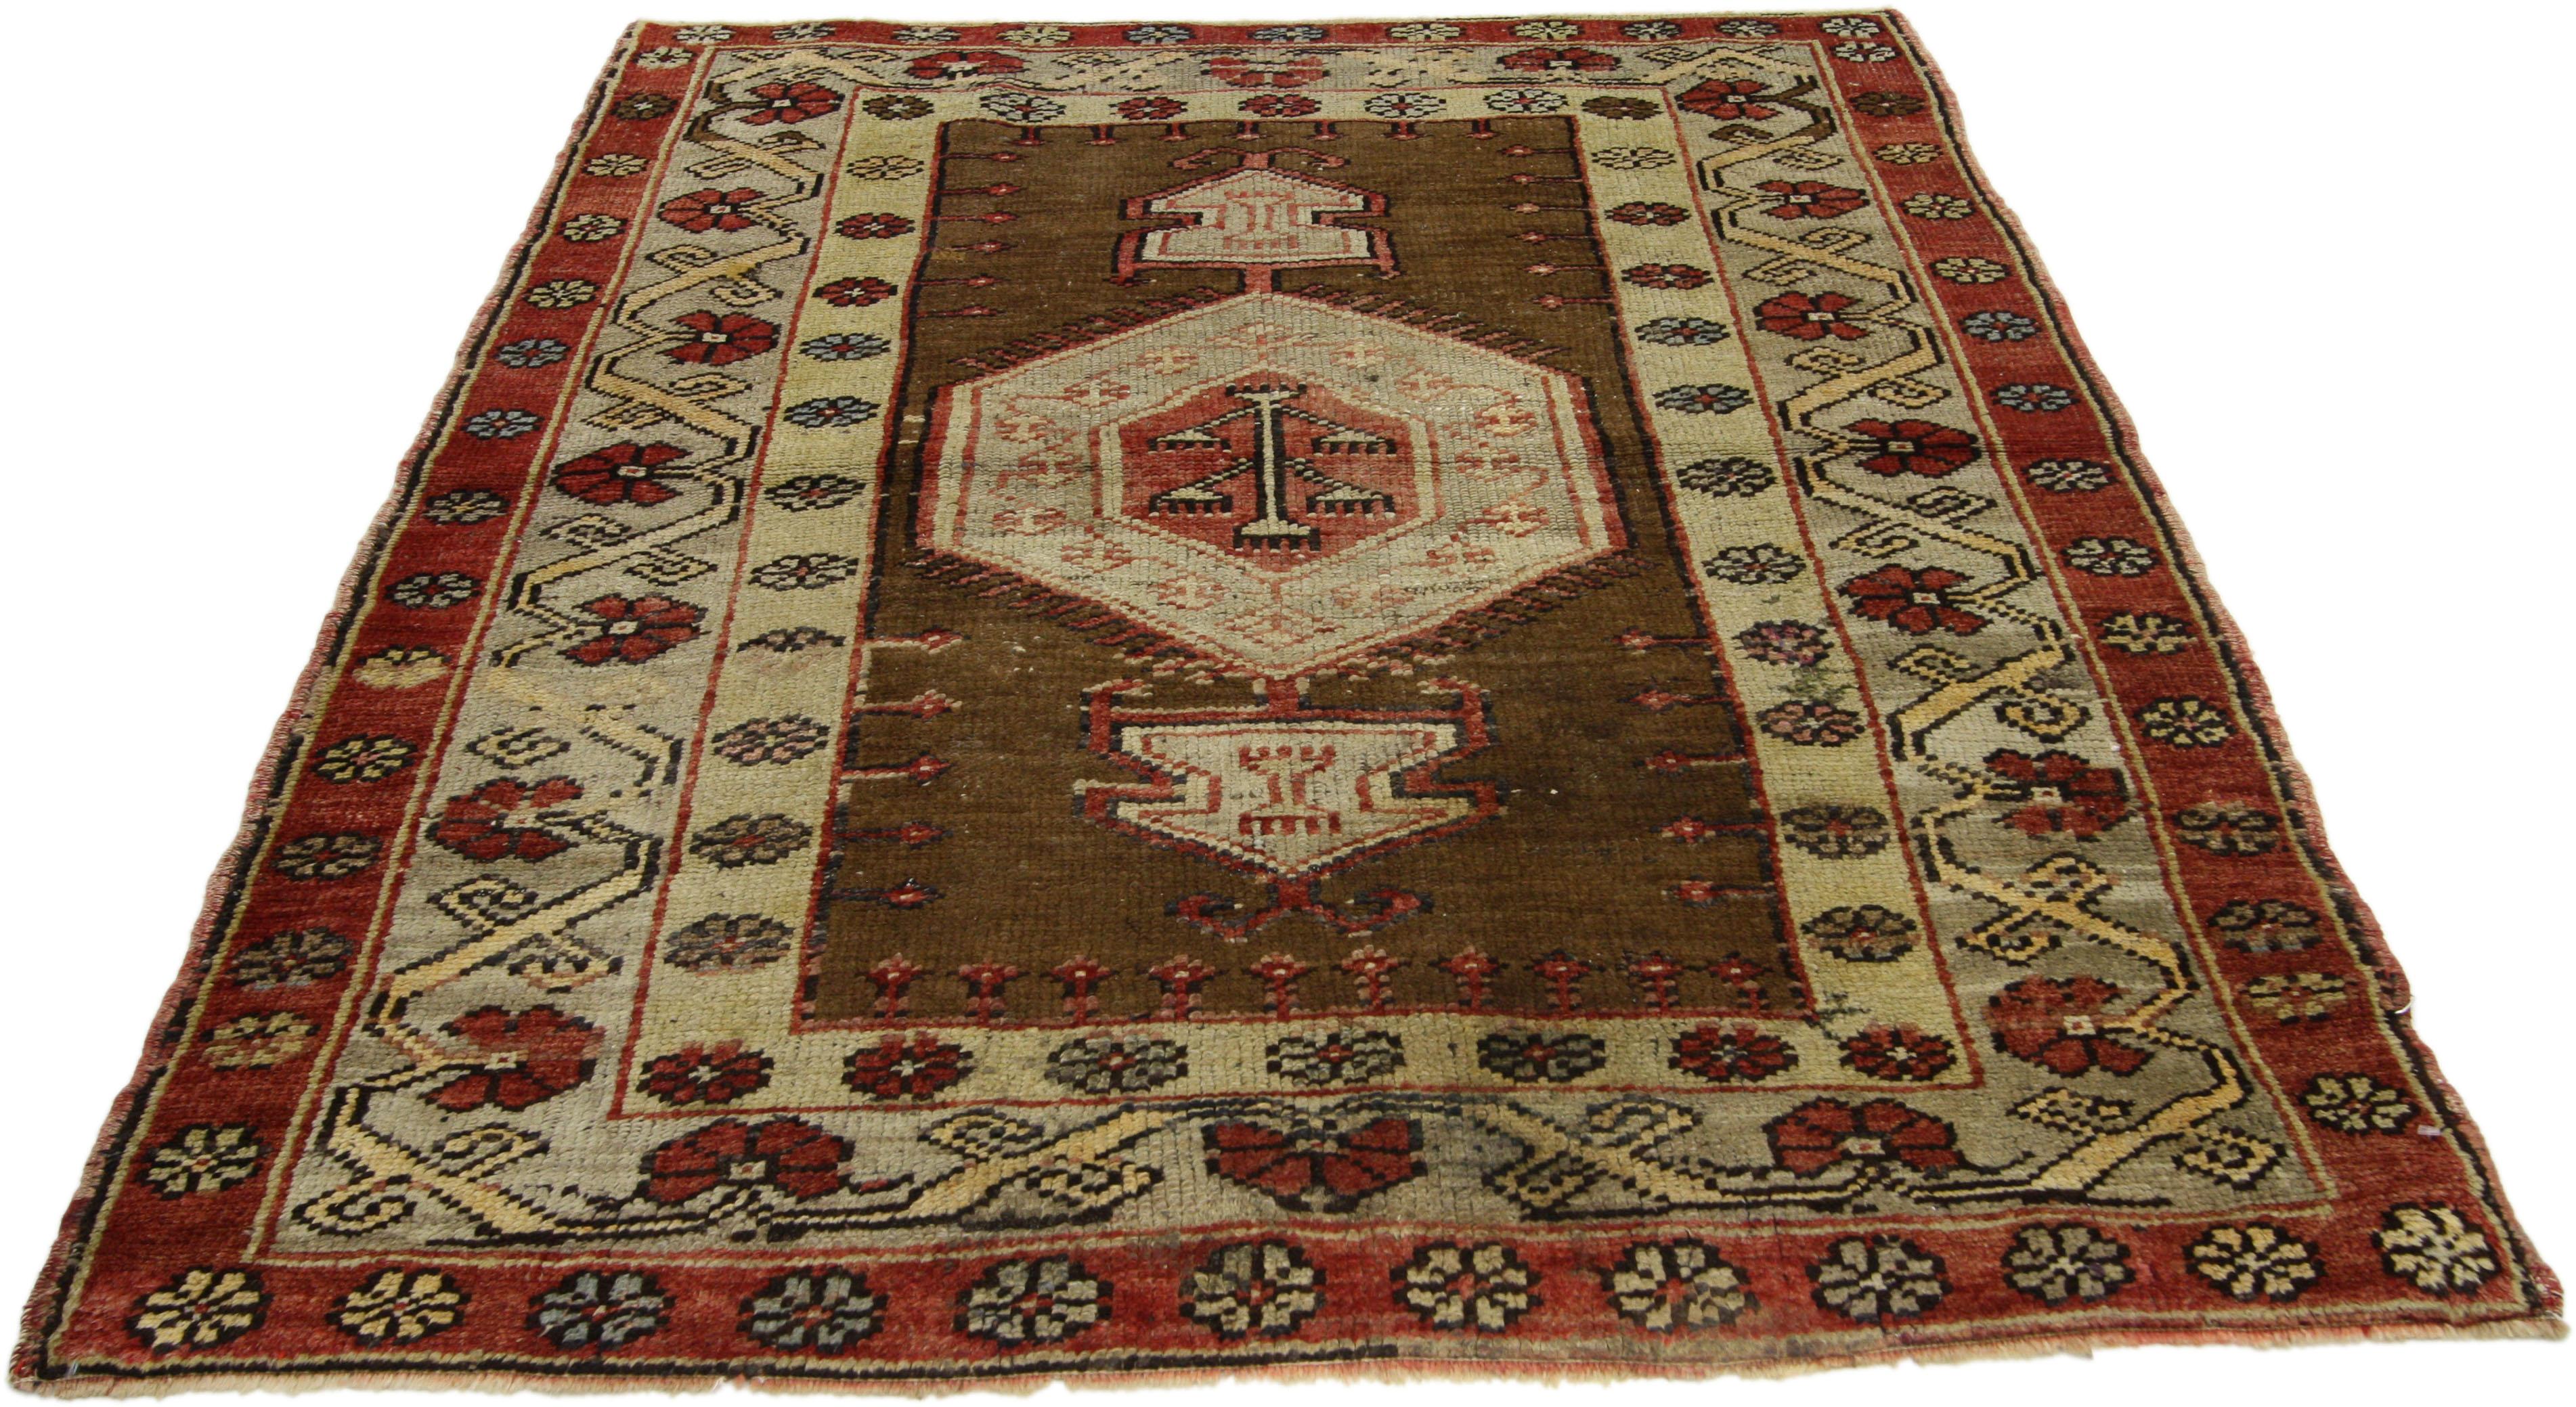 73884, vintage Turkish Oushak Accent rug, entry or foyer rug. This vintage Turkish Oushak rug features a modern traditional style. Immersed in Anatolian history and refined colors, this vintage Oushak rug combines simplicity with sophistication.